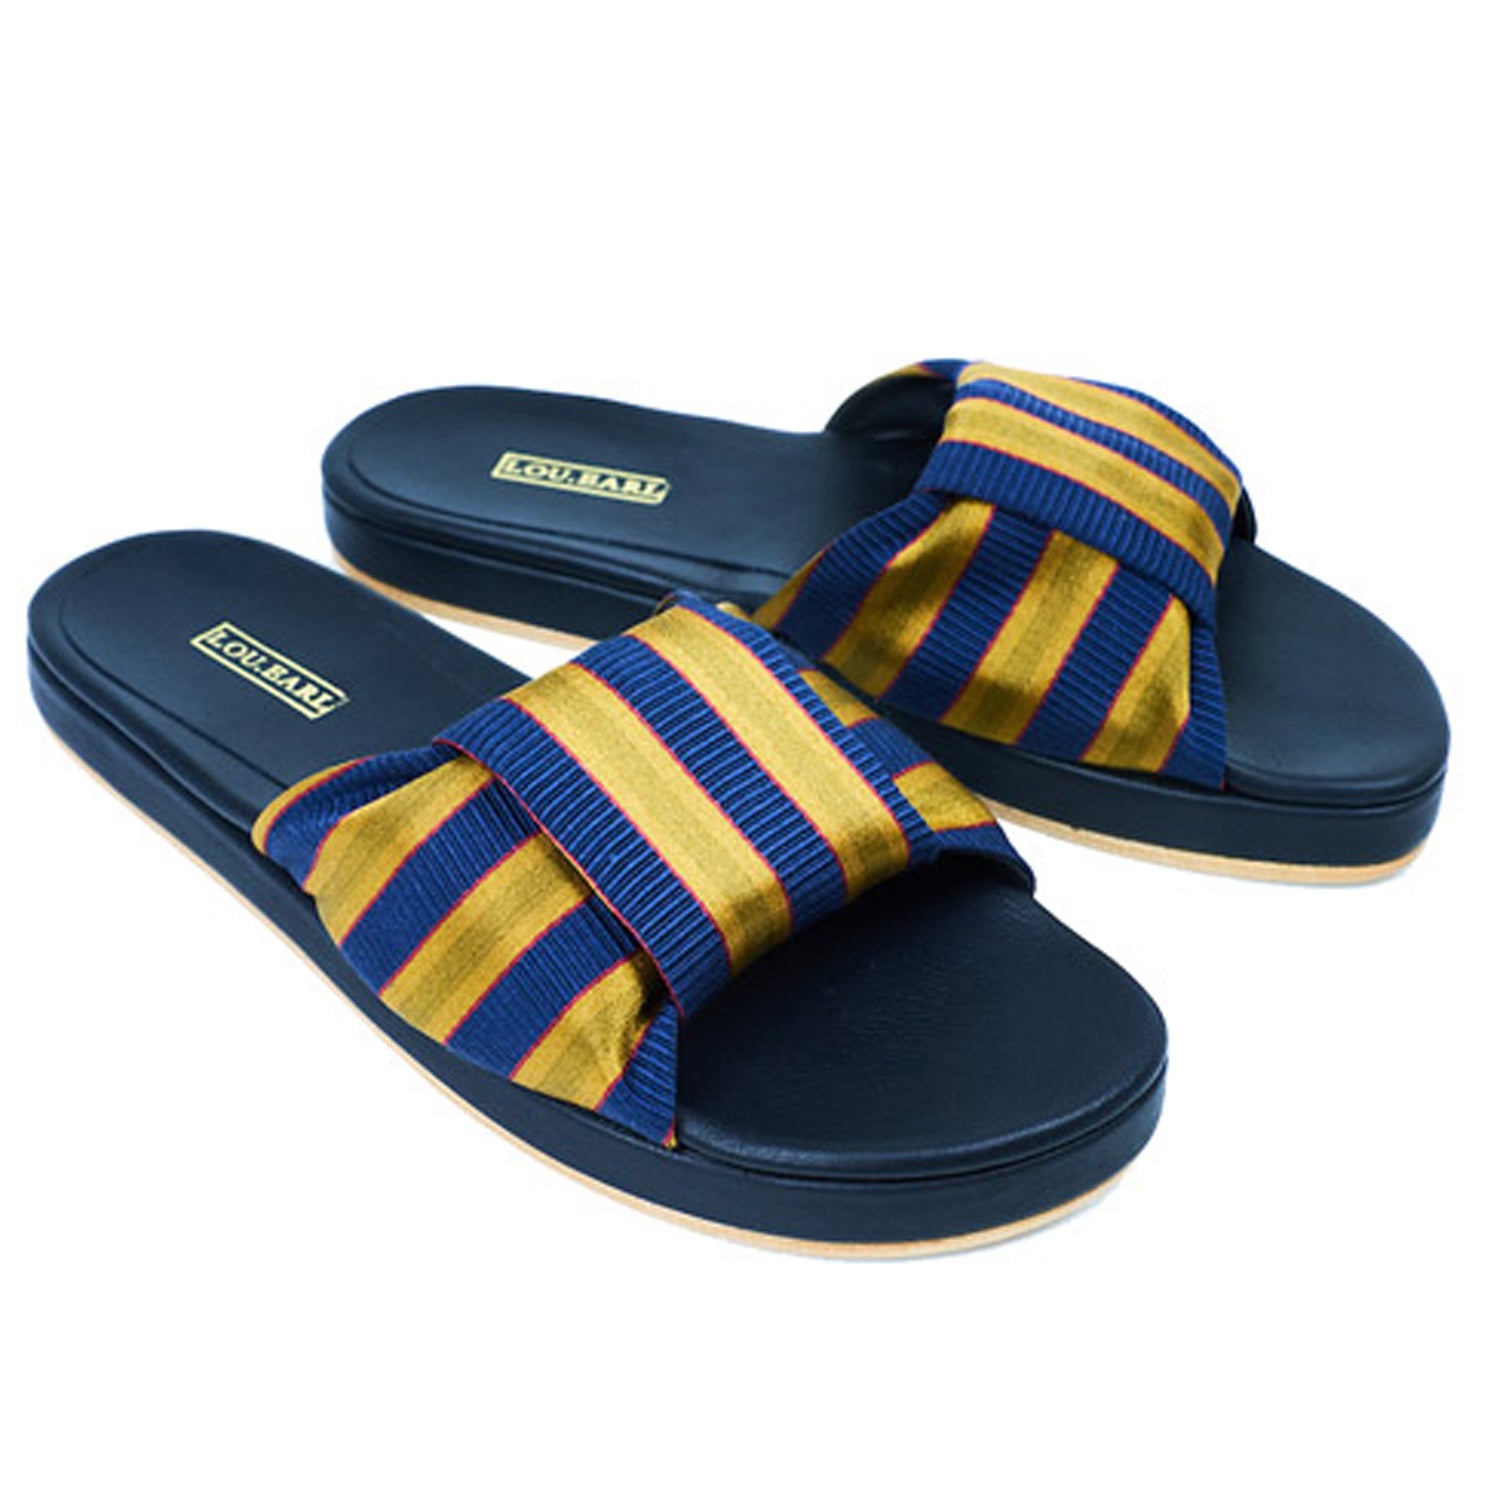 Navy and gold striped womens bowtie leather sandals with contoured footbed and gold logo. 